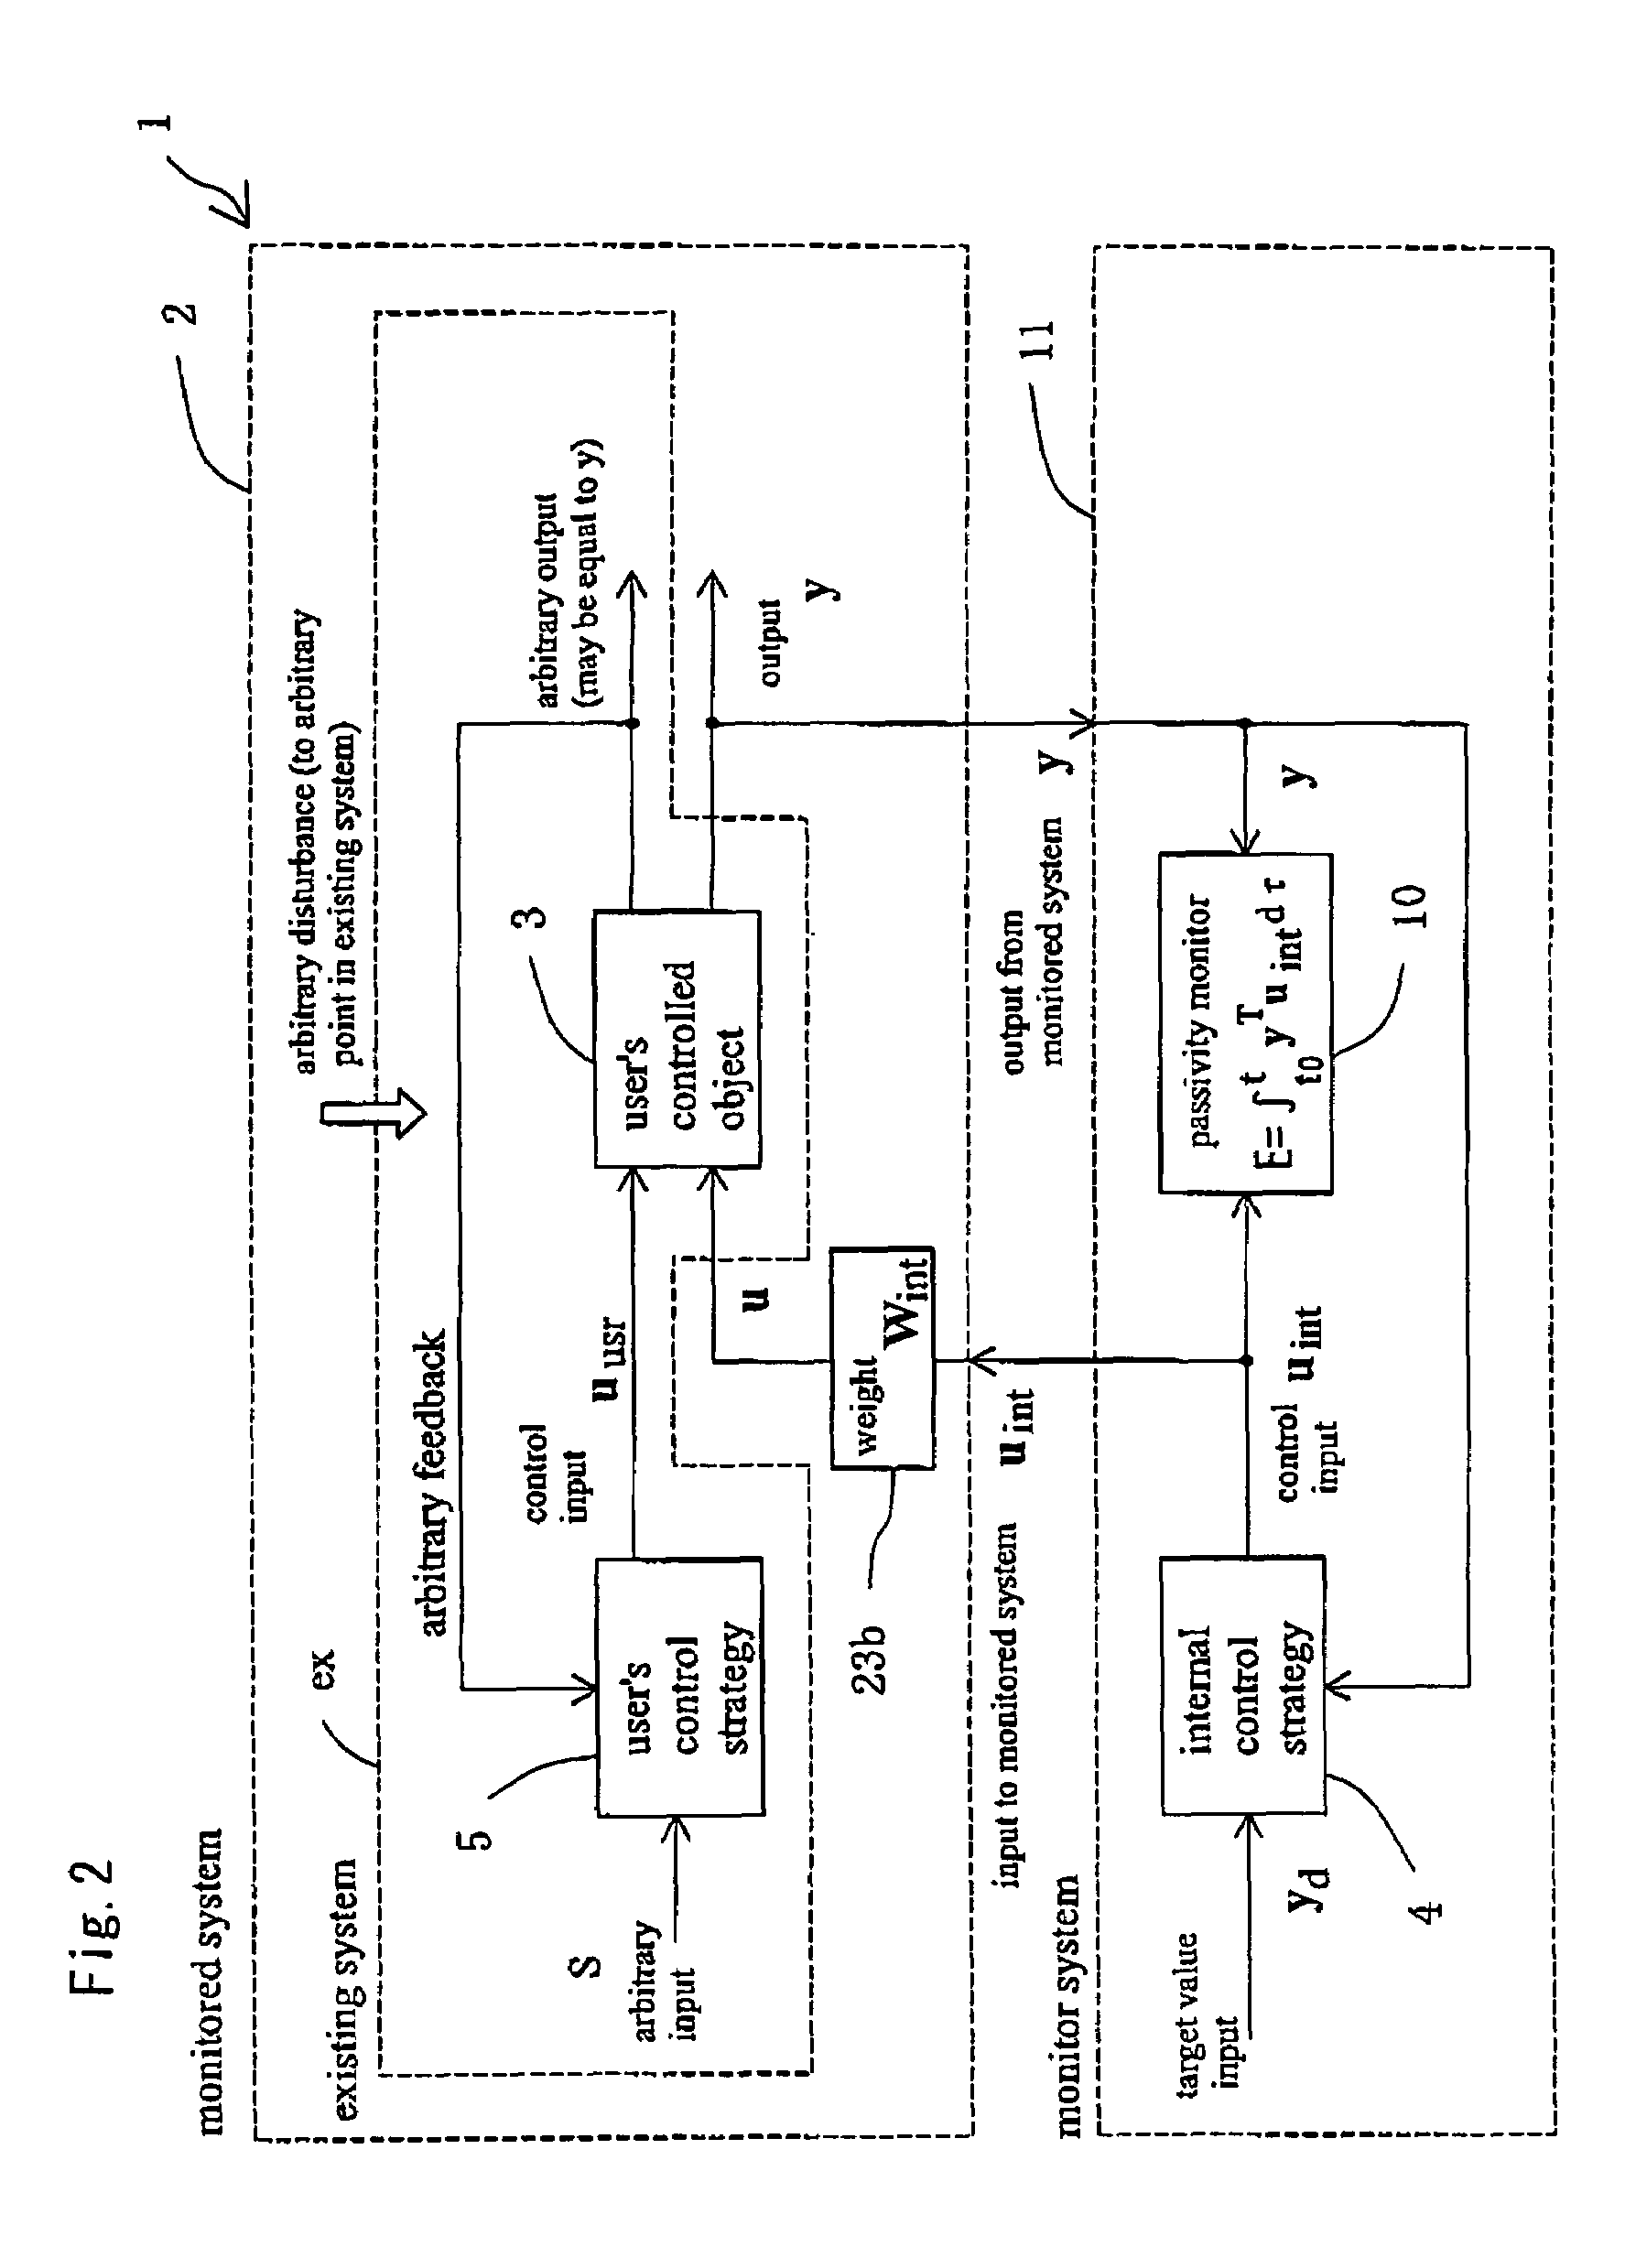 Control system provided with virtual power monitor and thereby provided with function of evaluating and analyzing stability of object to be controlled